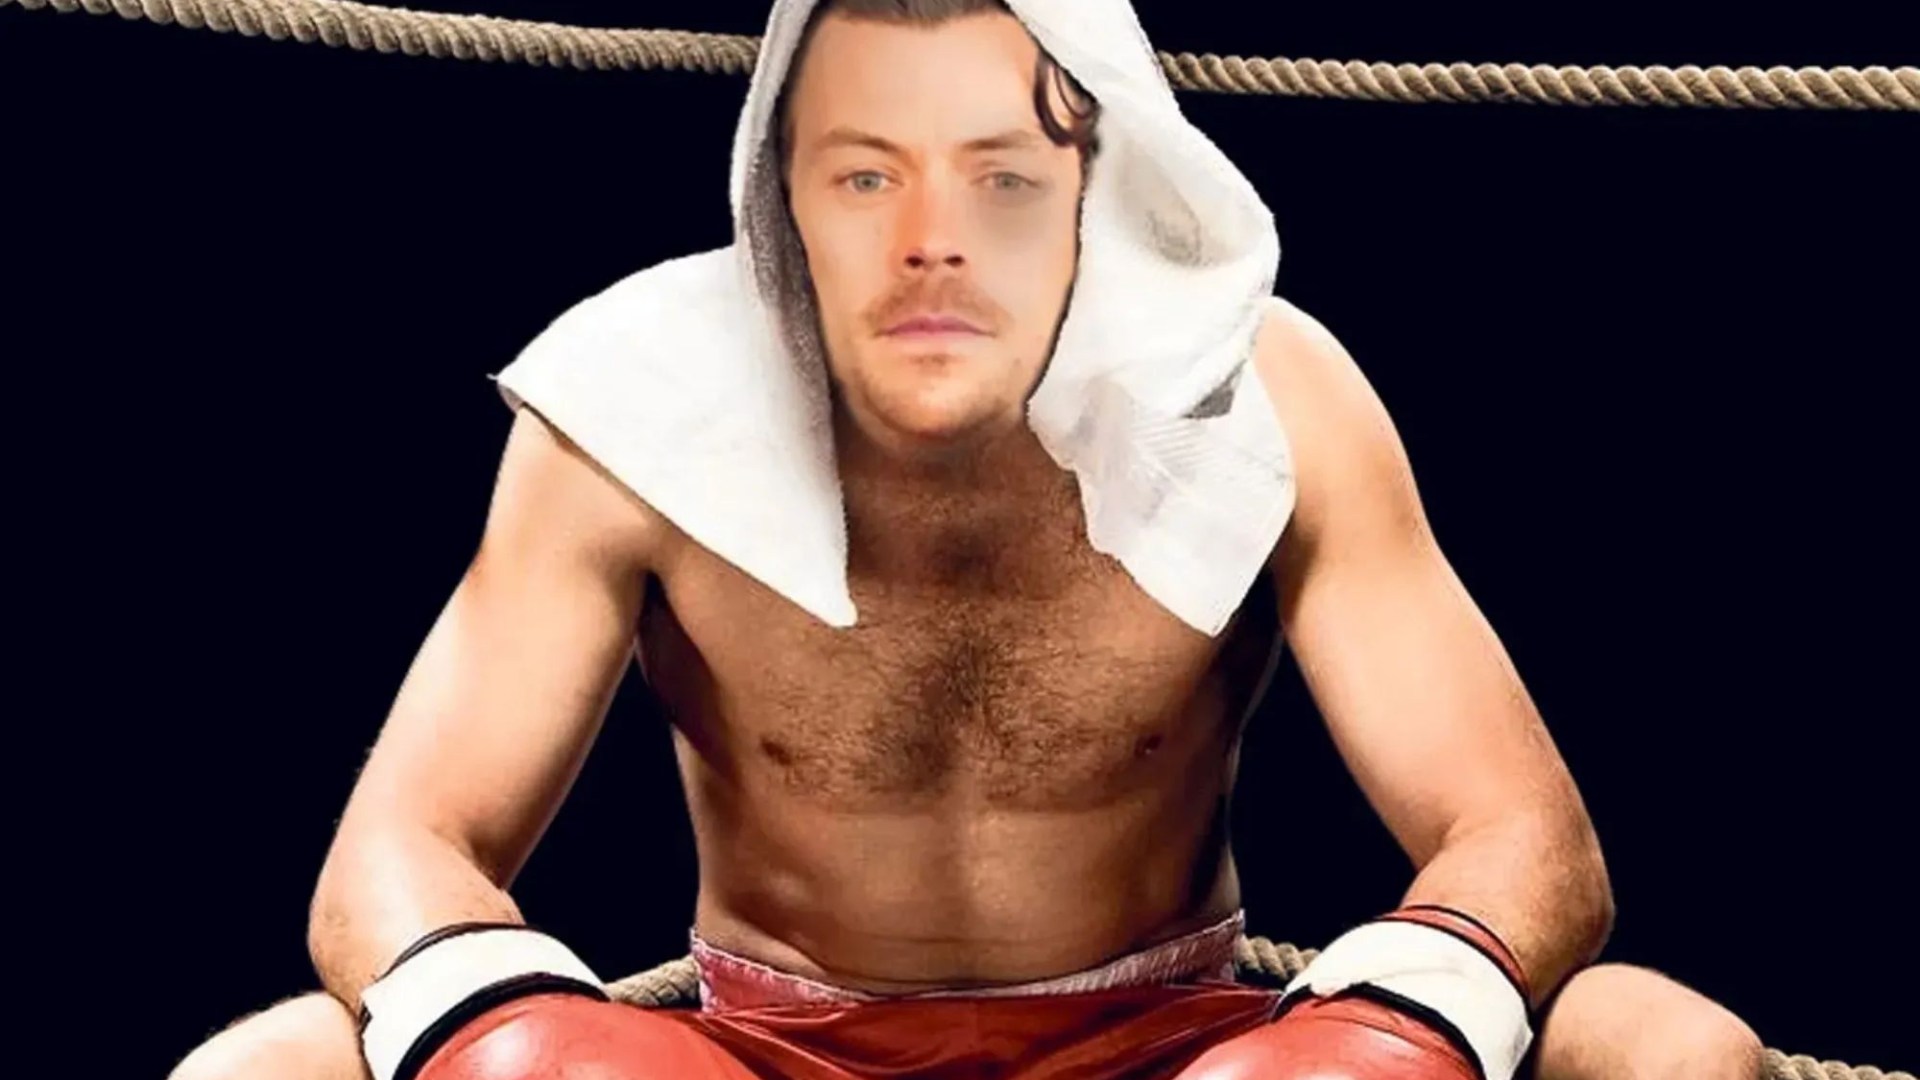 Harry Styles Transforms with Hardcore Boxing Training Inspired by Tyson Fury Post-Stalker Ordeal